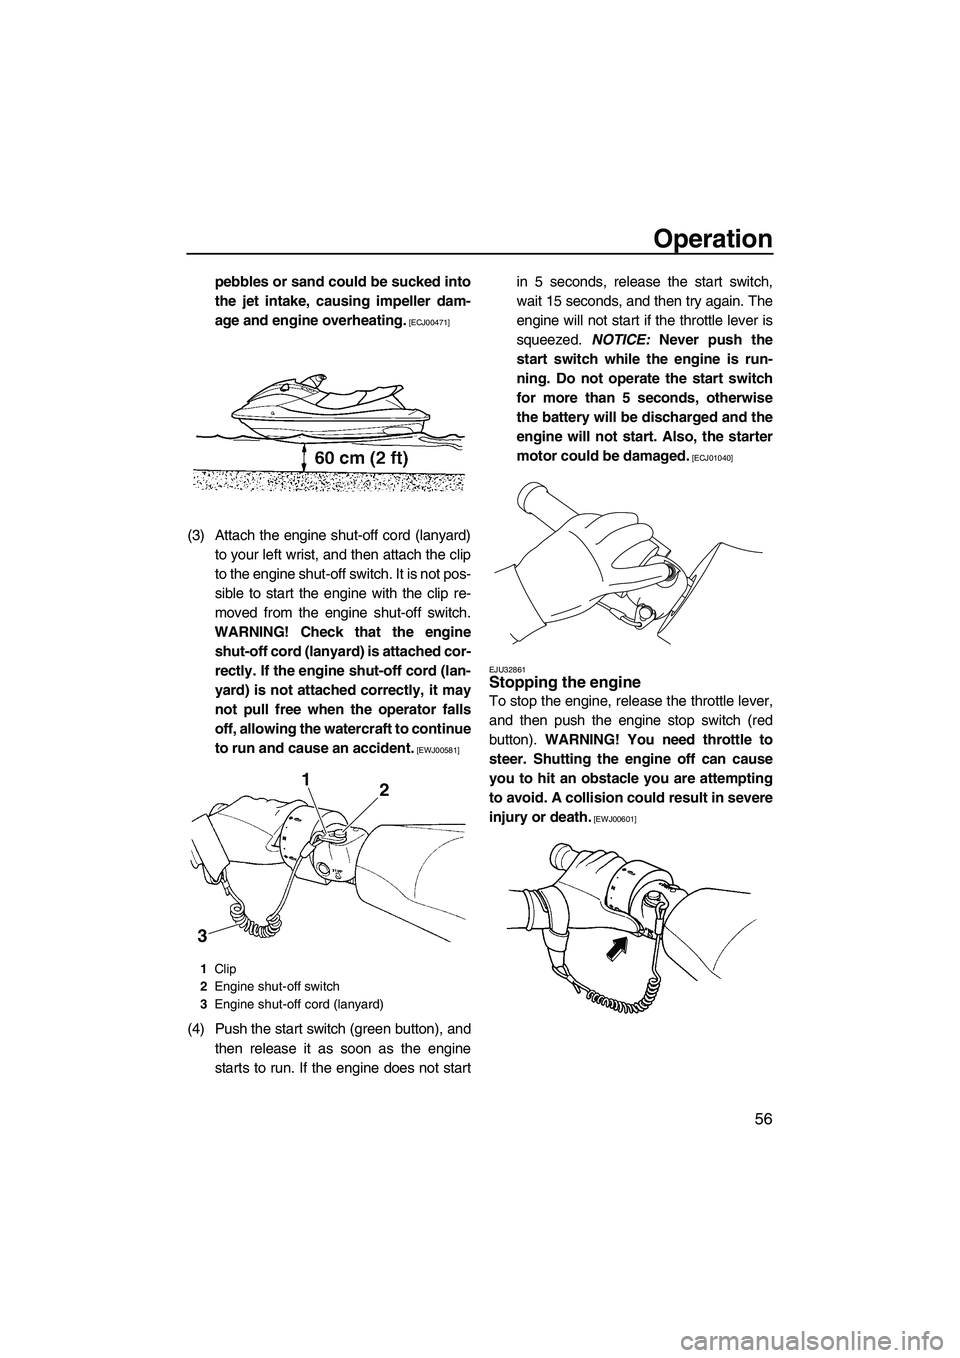 YAMAHA FZS 2009  Owners Manual Operation
56
pebbles or sand could be sucked into
the jet intake, causing impeller dam-
age and engine overheating.
 [ECJ00471]
(3) Attach the engine shut-off cord (lanyard)
to your left wrist, and th